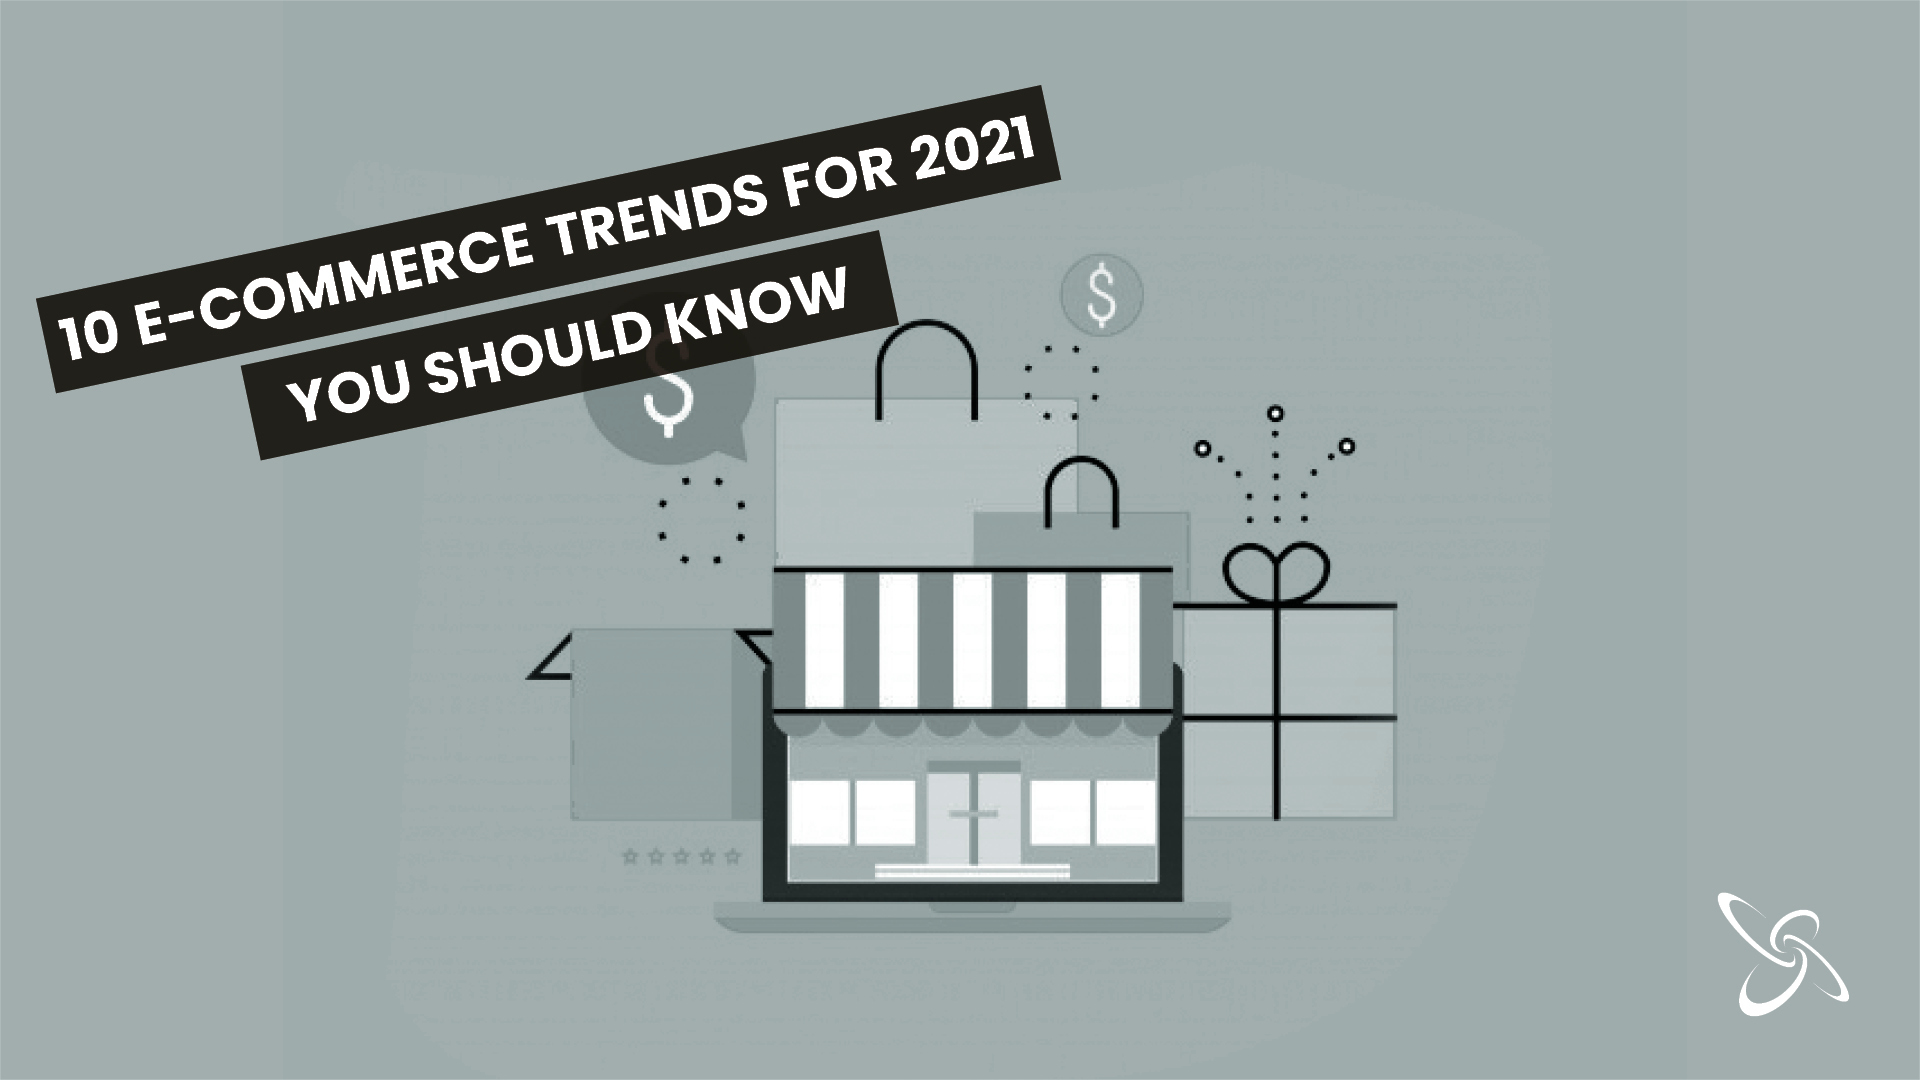 10 e-commerce trends for 2021 you should know